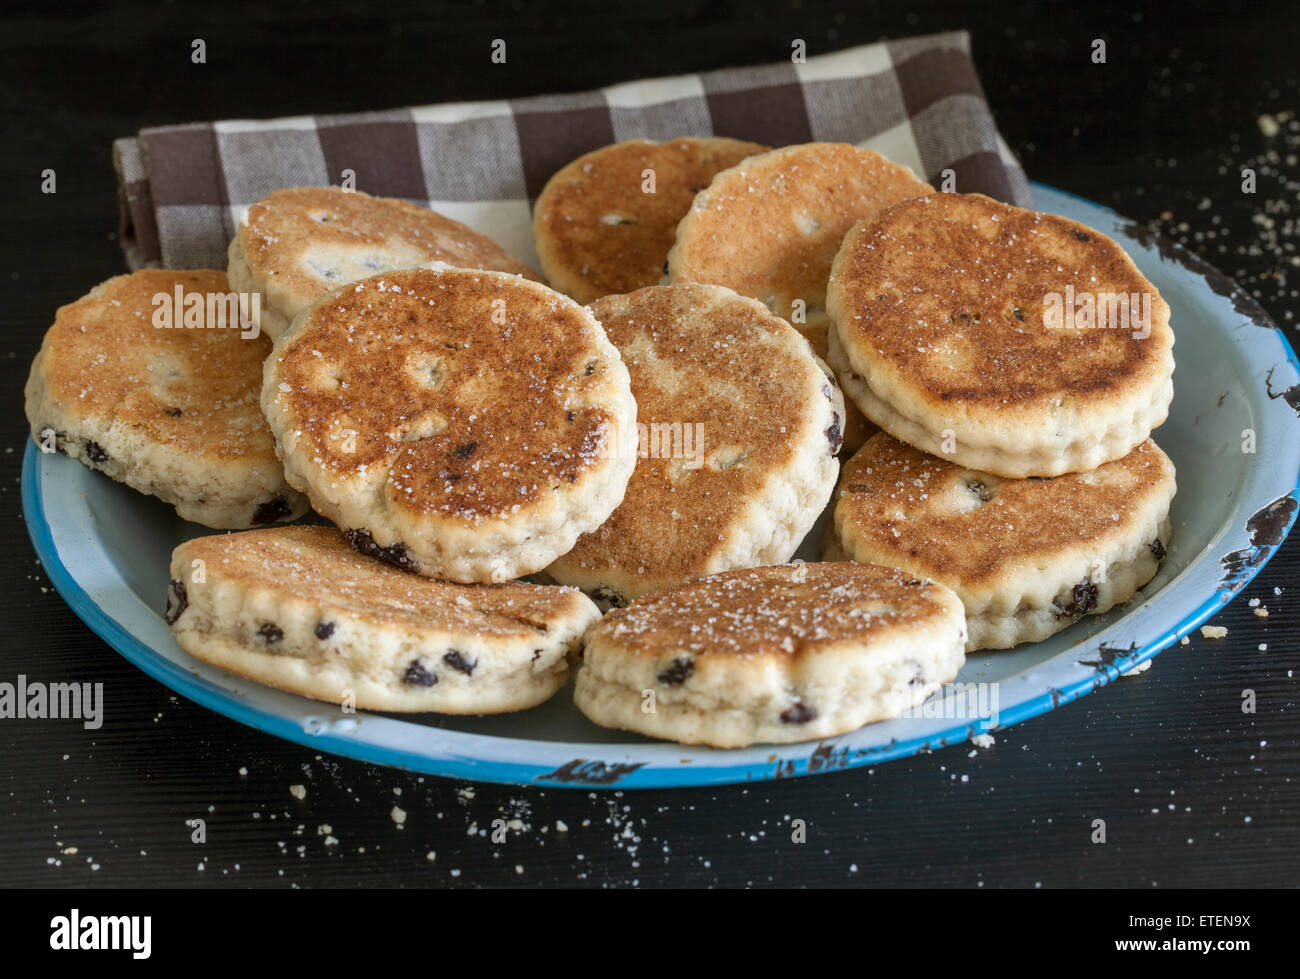 Welsh cakes or Welshcakes (or pics) - a traditional food delicacy in Wales Stock Photo